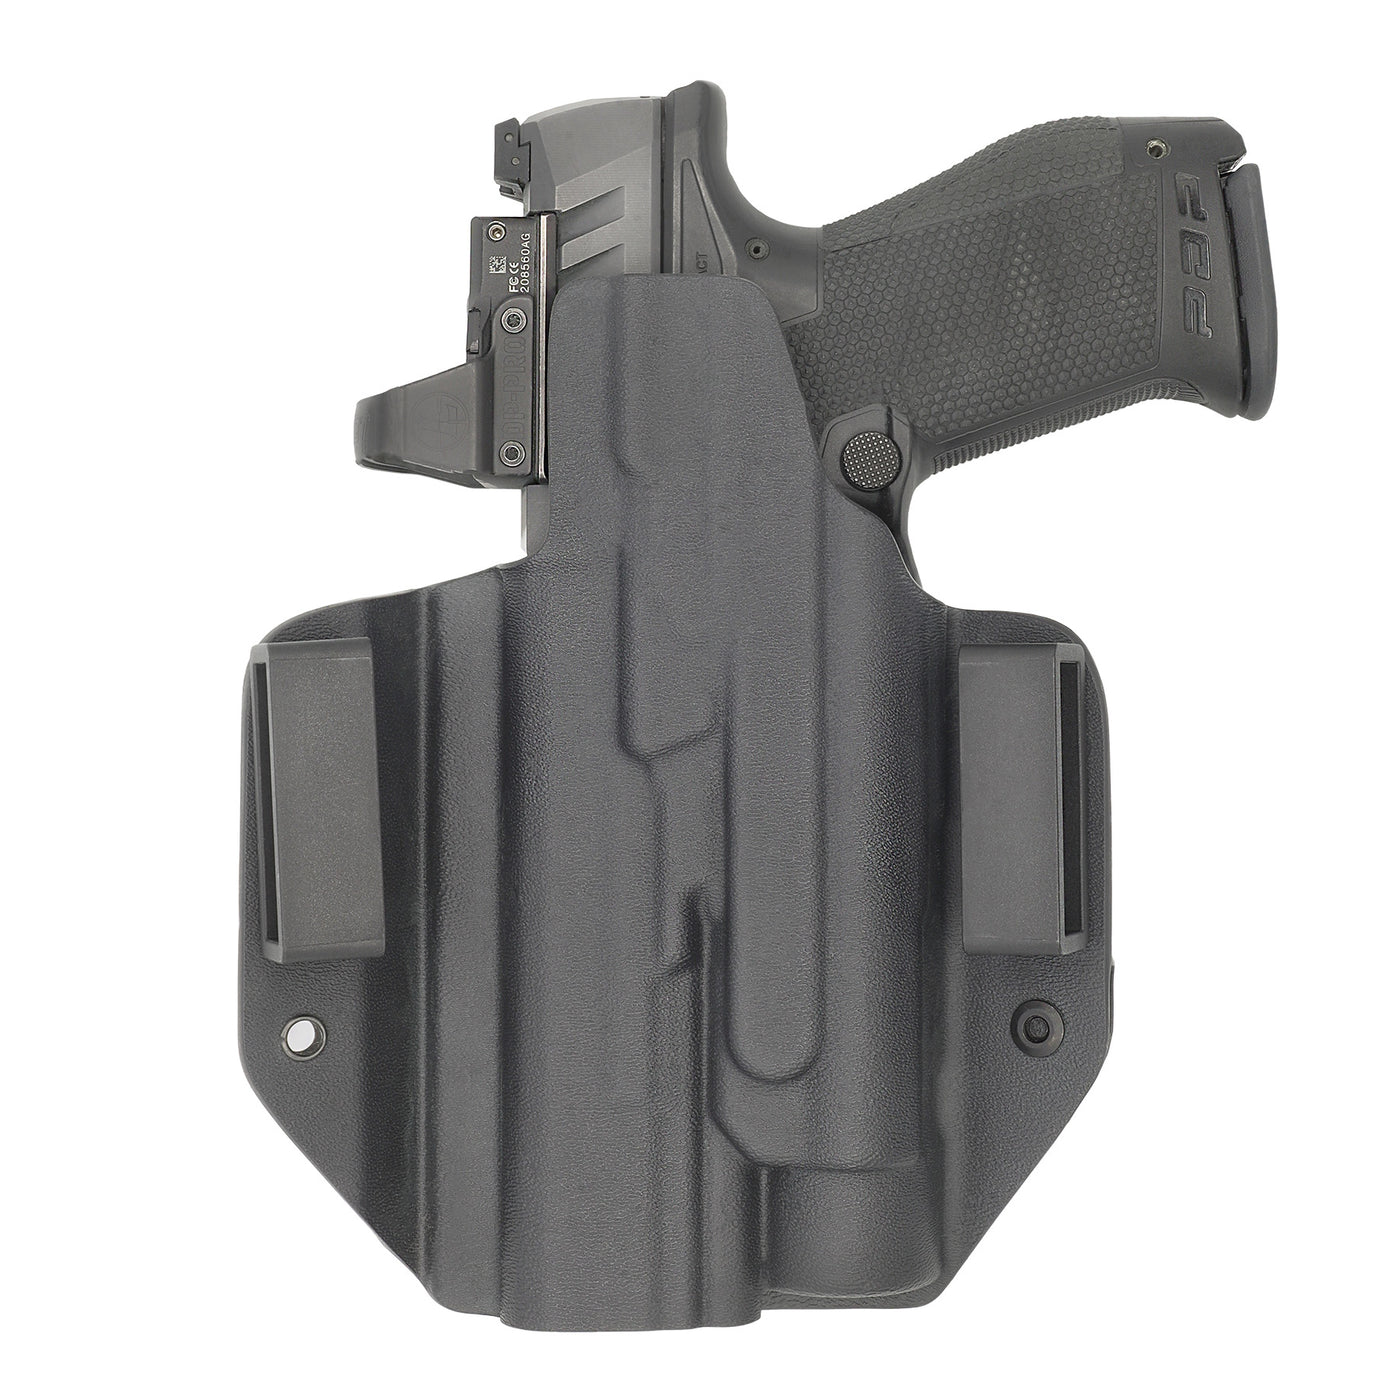 C&G Holsters custom OWB Tactical S&W M&P 9/40 Streamlight TLR1 in holstered position back view